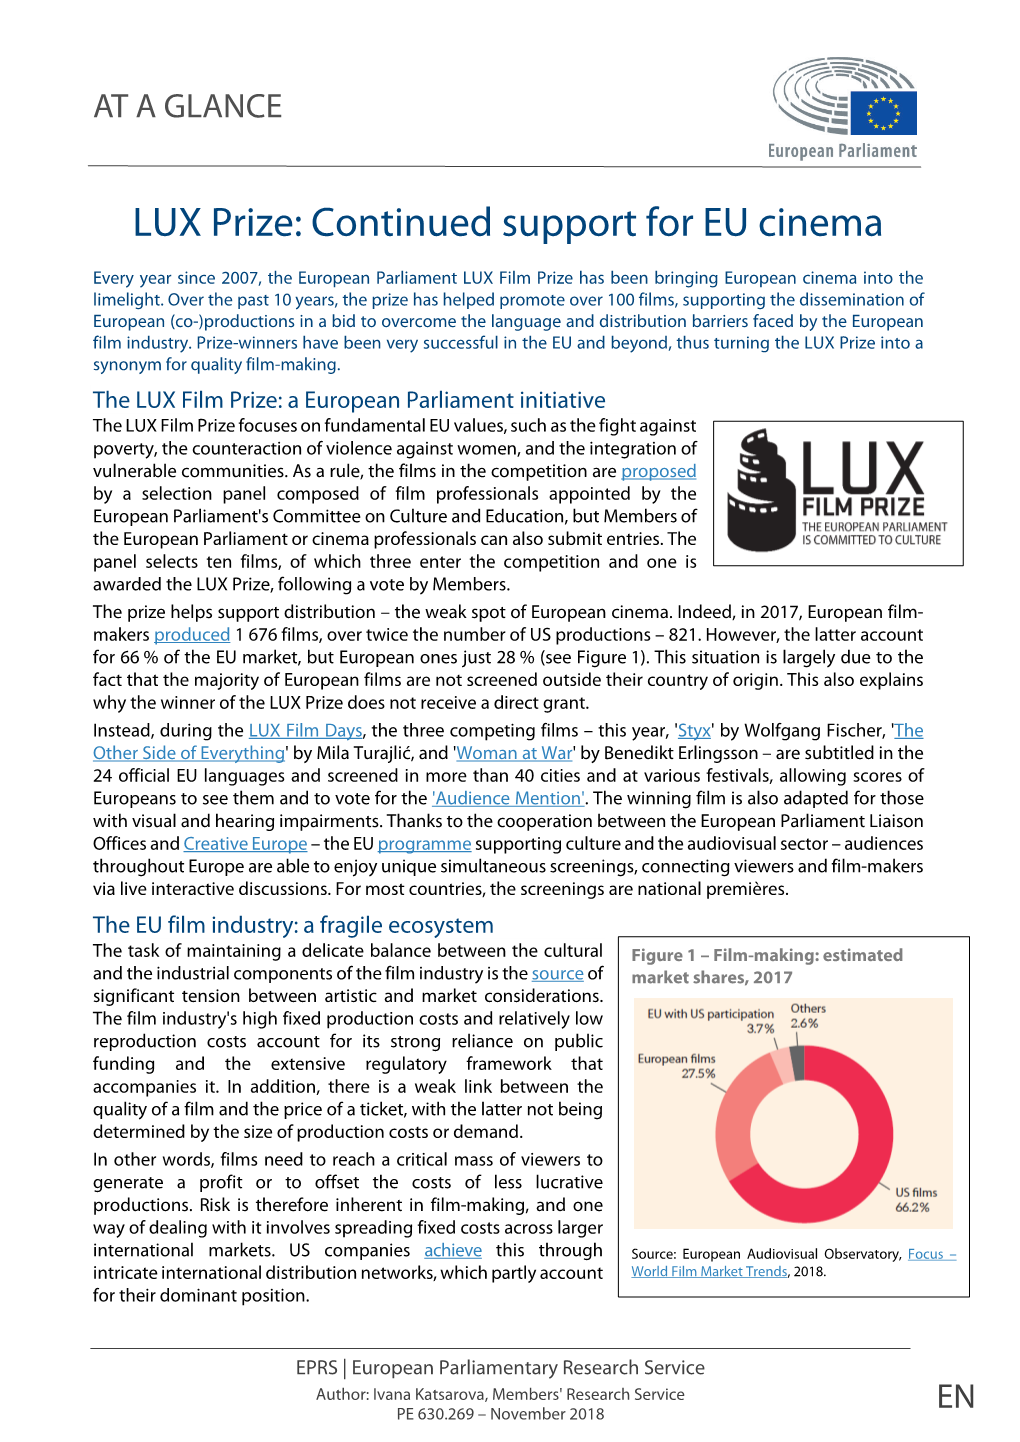 LUX Prize: Continued Support for EU Cinema